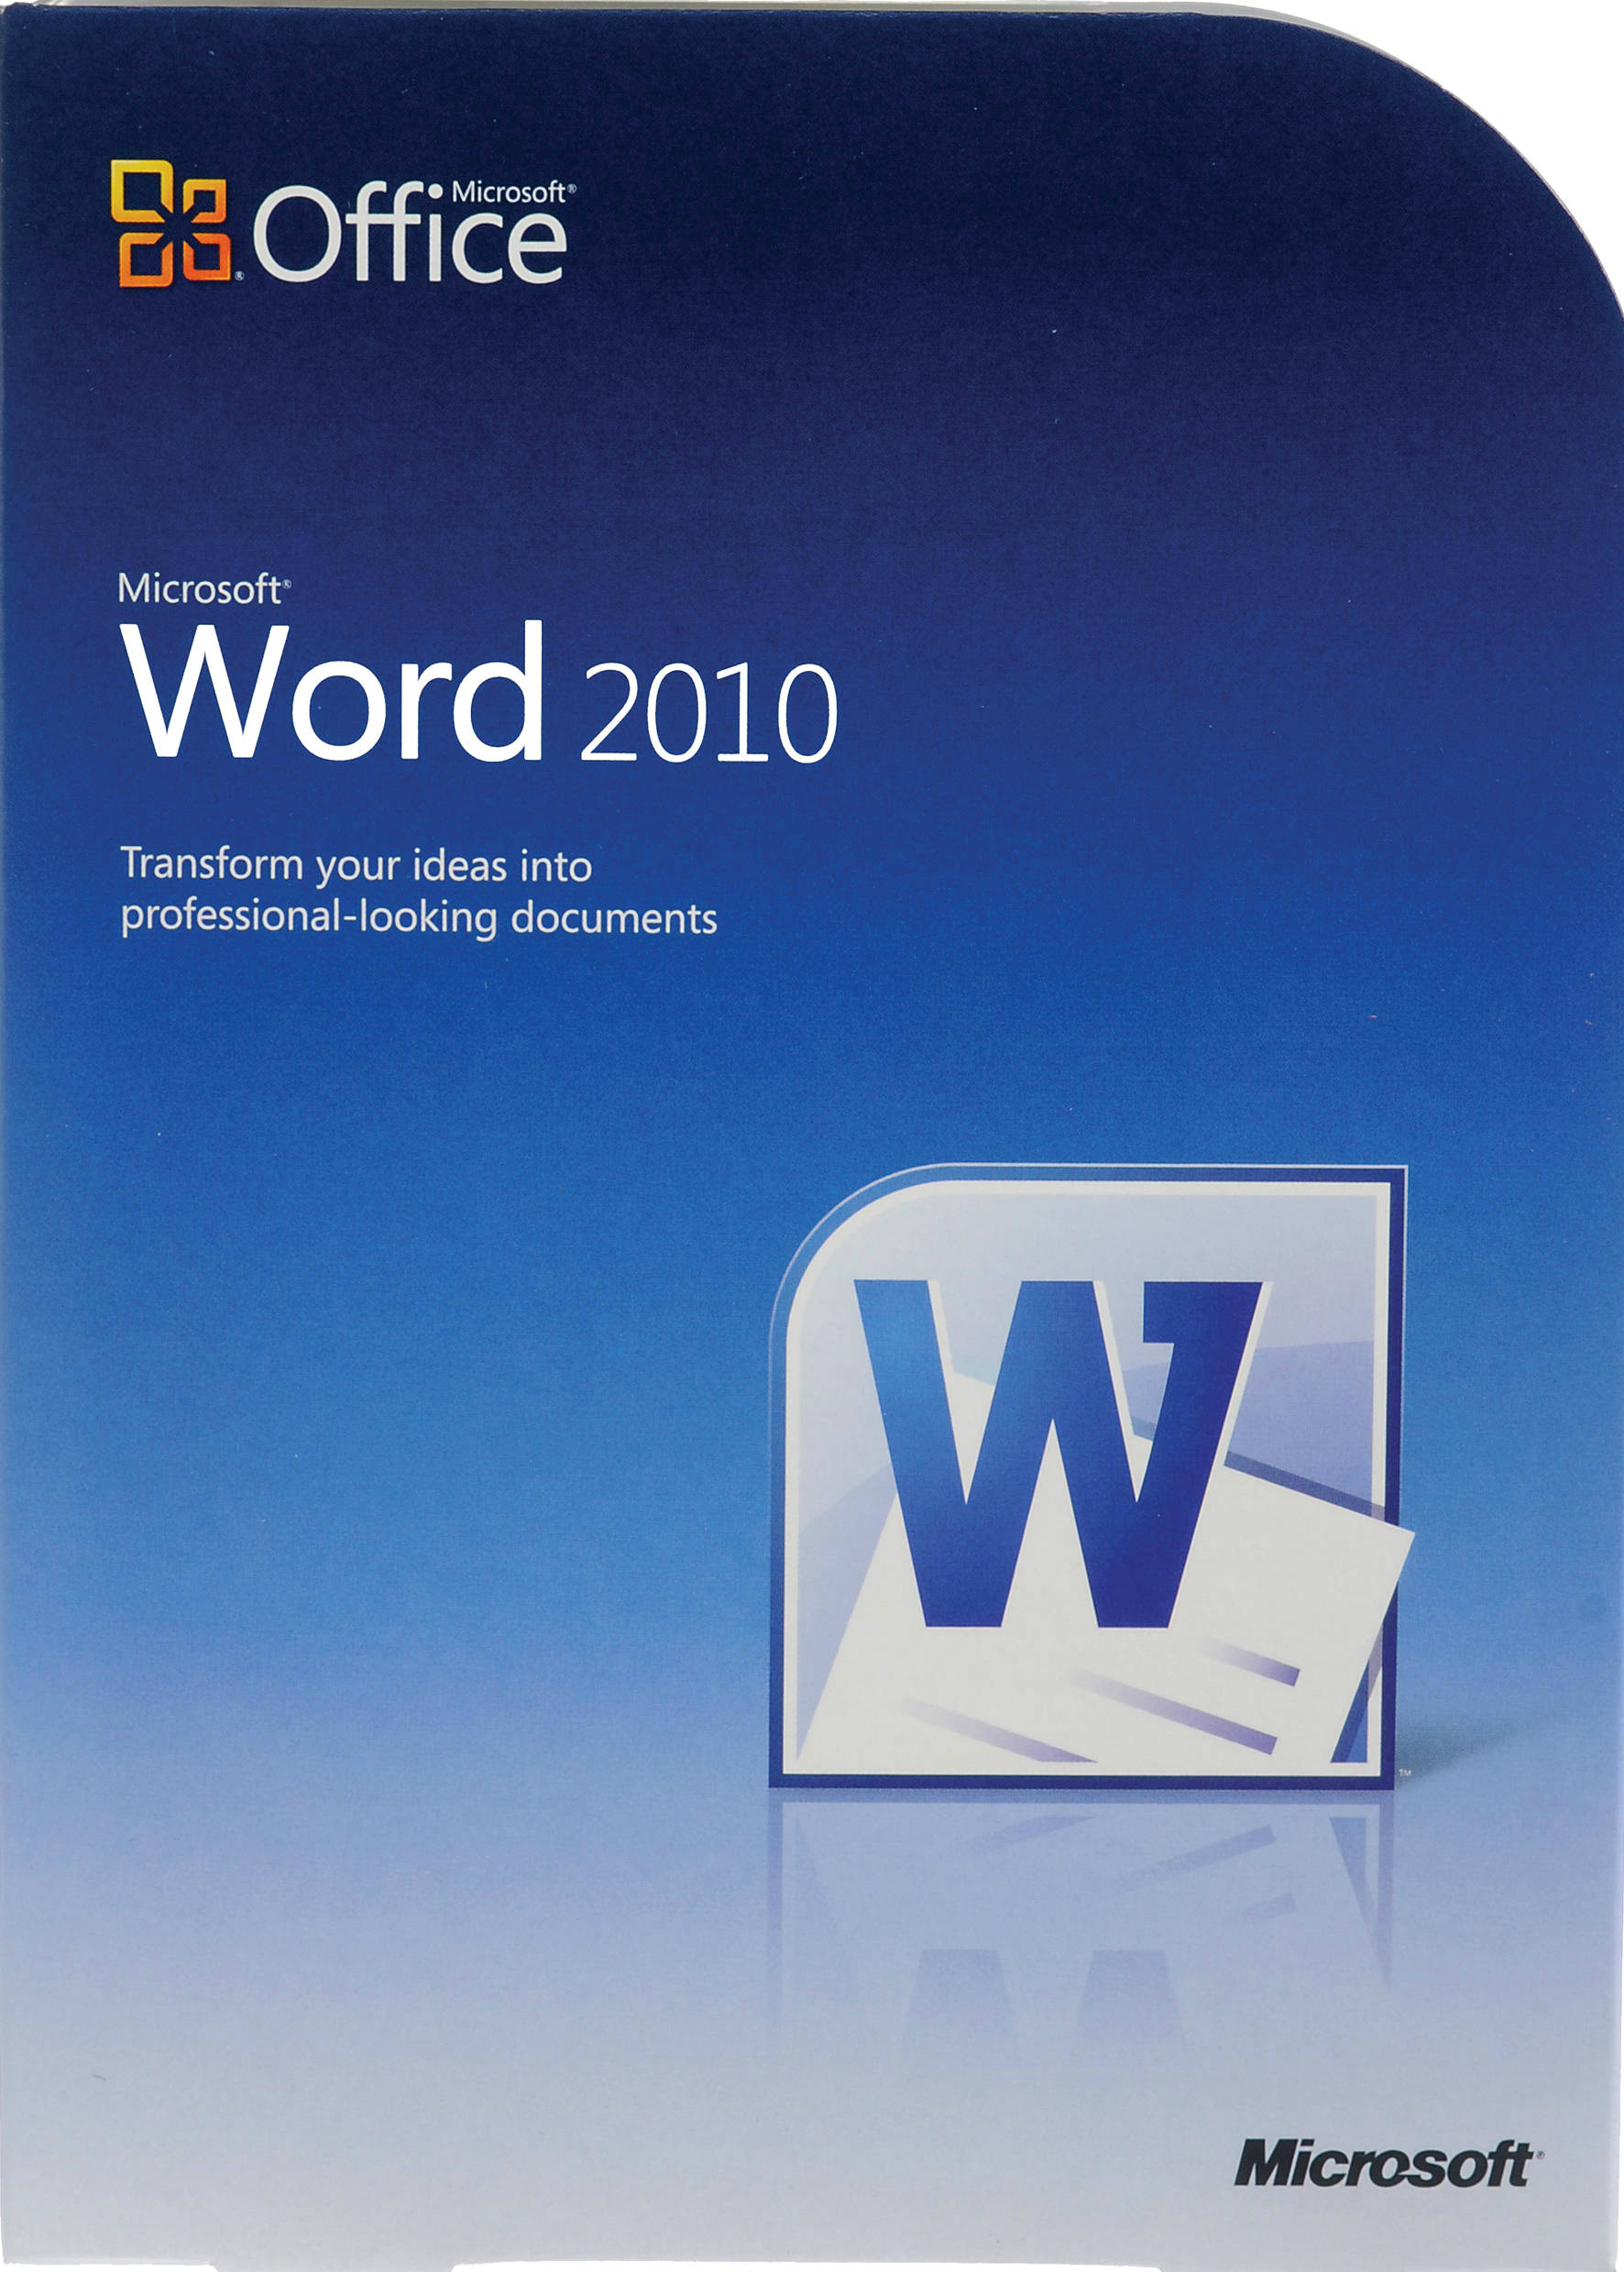 Word 2010 - Level 2 - Formatting Content